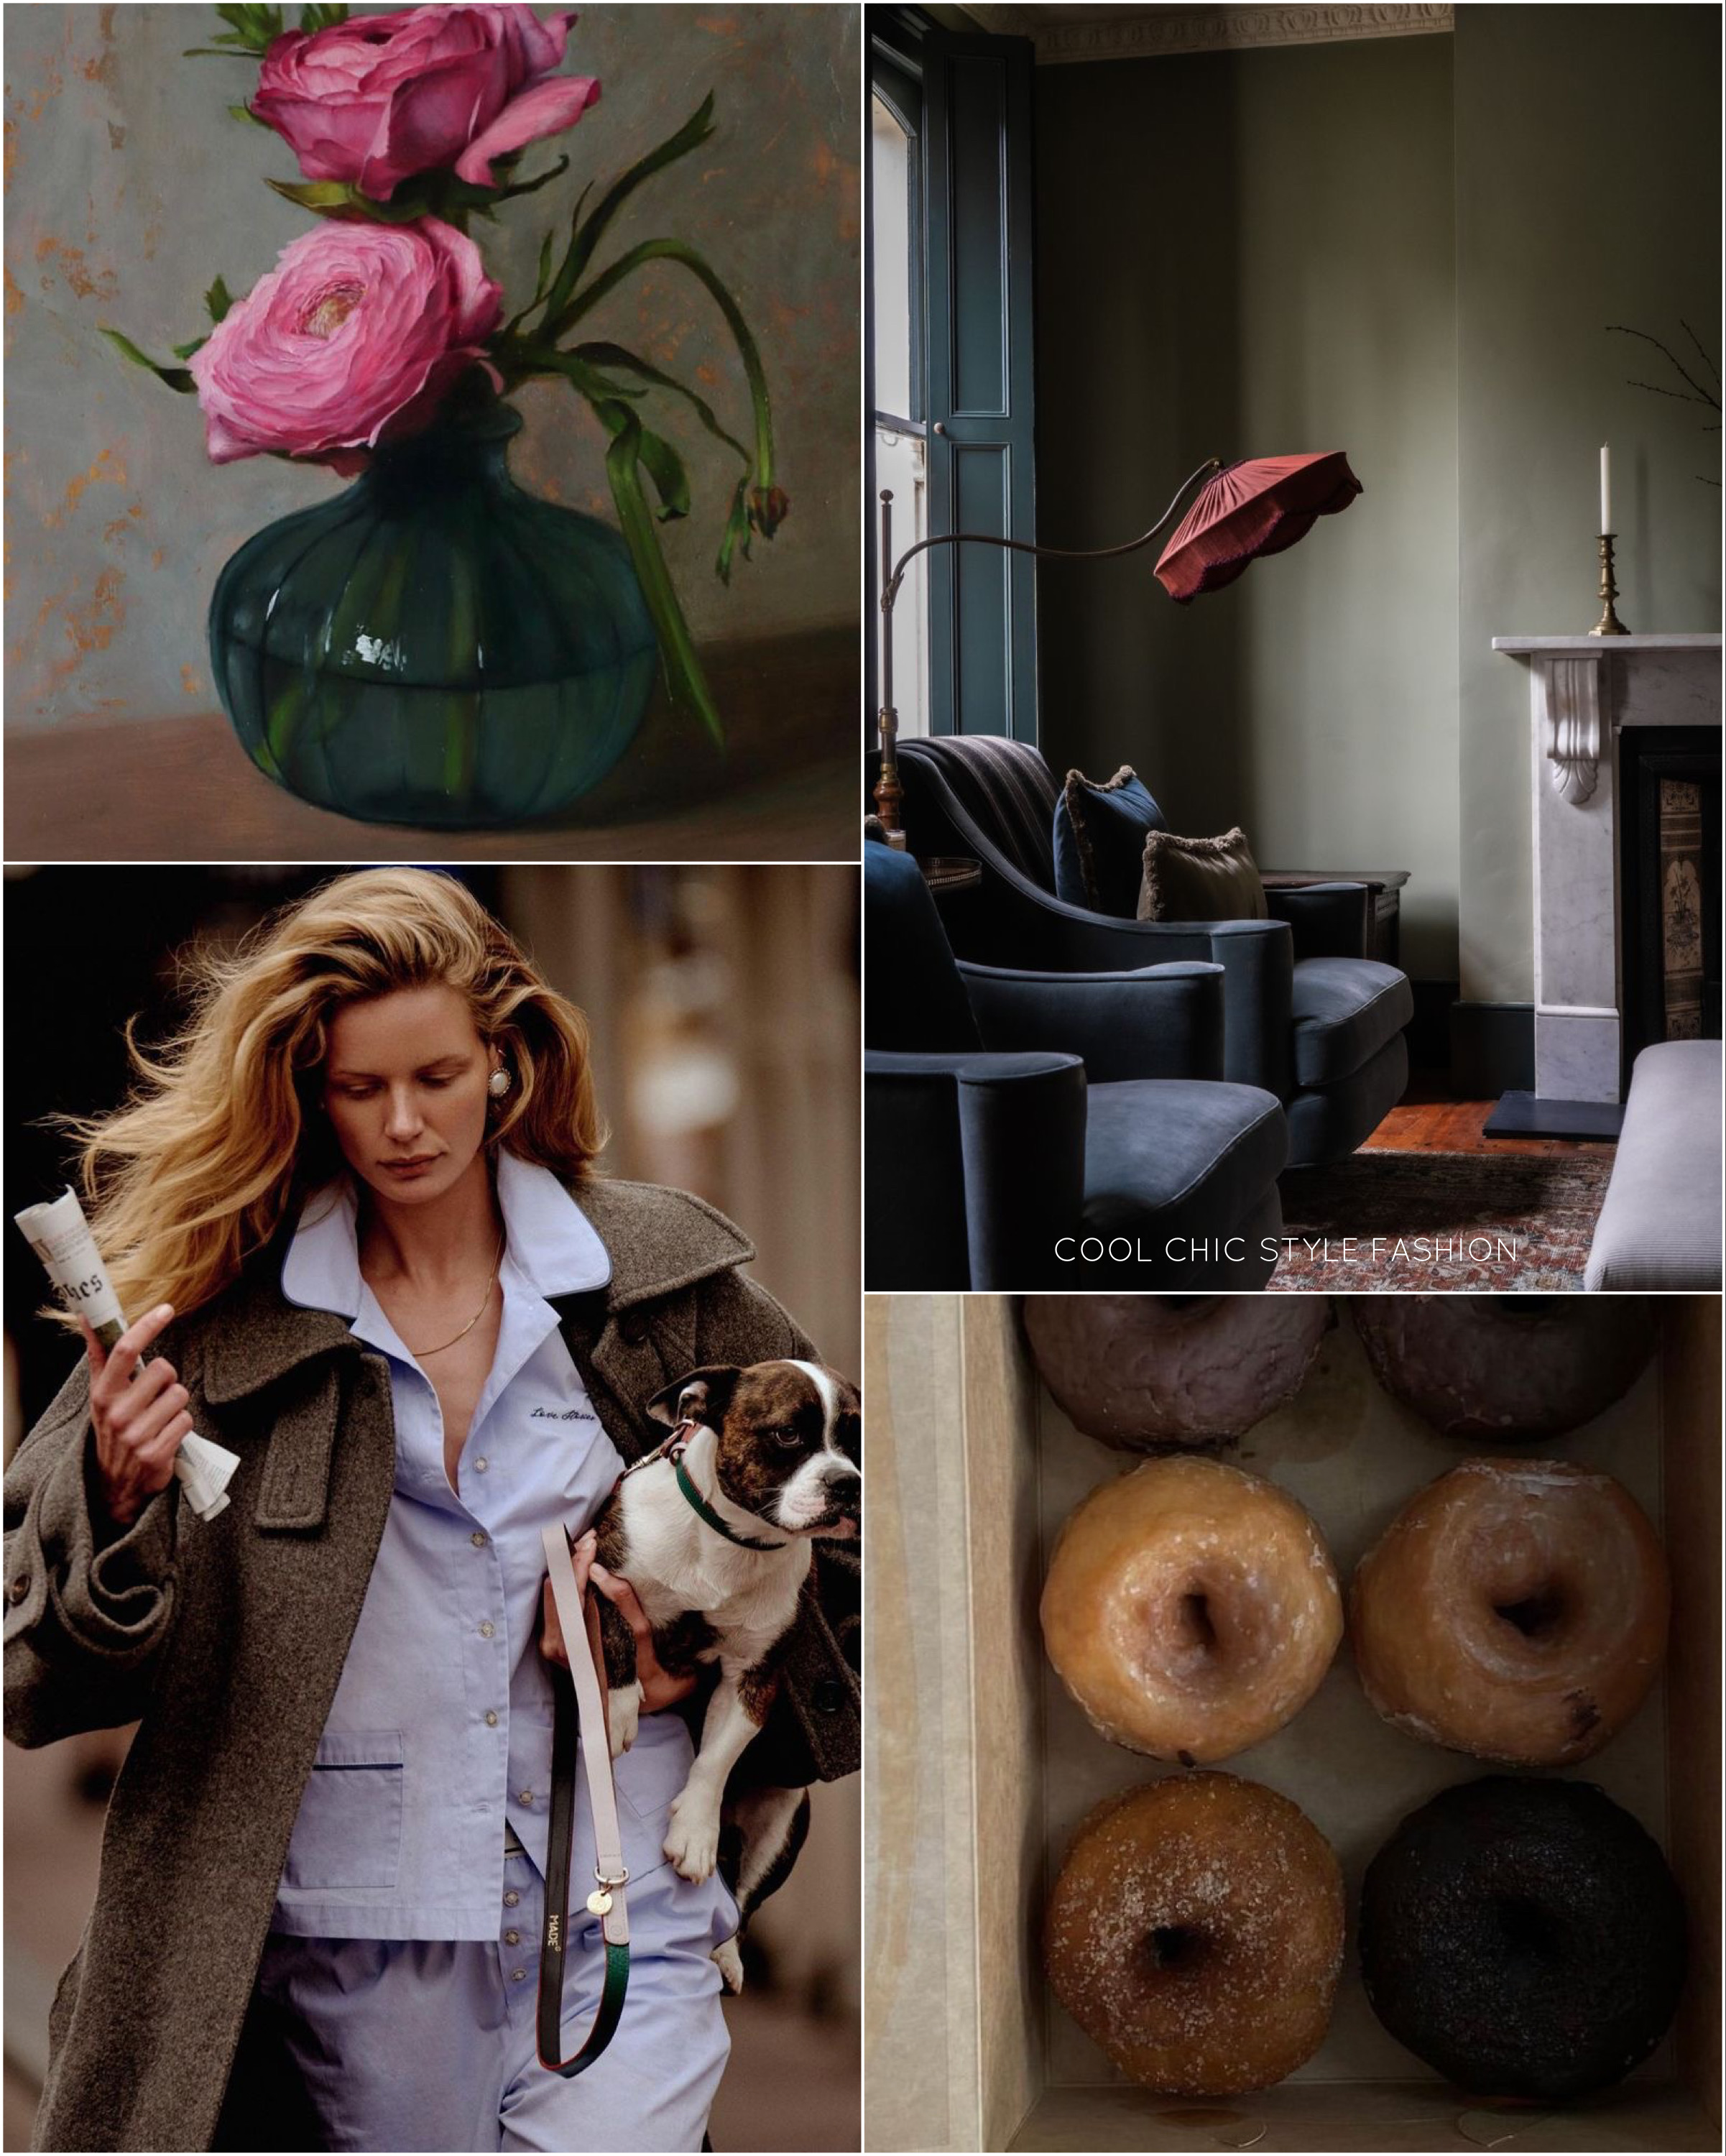 DOMENICA MATTINA  pyjama style, 10 curiosità sui DONUTS, Living room Victorian Project and More. DAILY INSPIRATION. Things That Inspire Me.